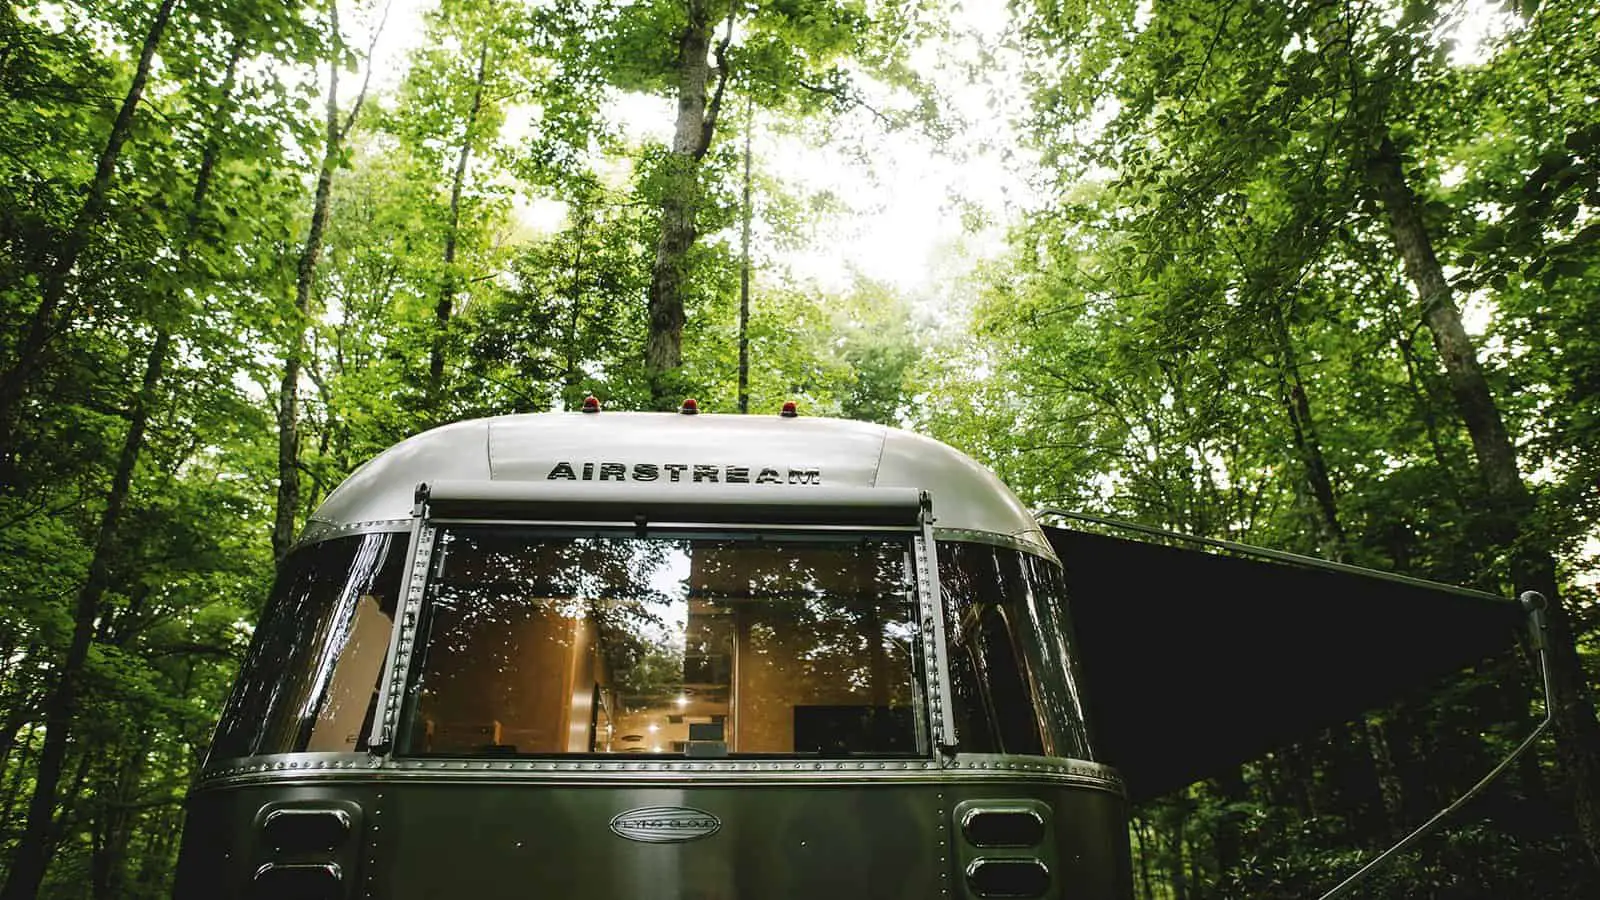 Average Cost of the Most Popular Airstream Models